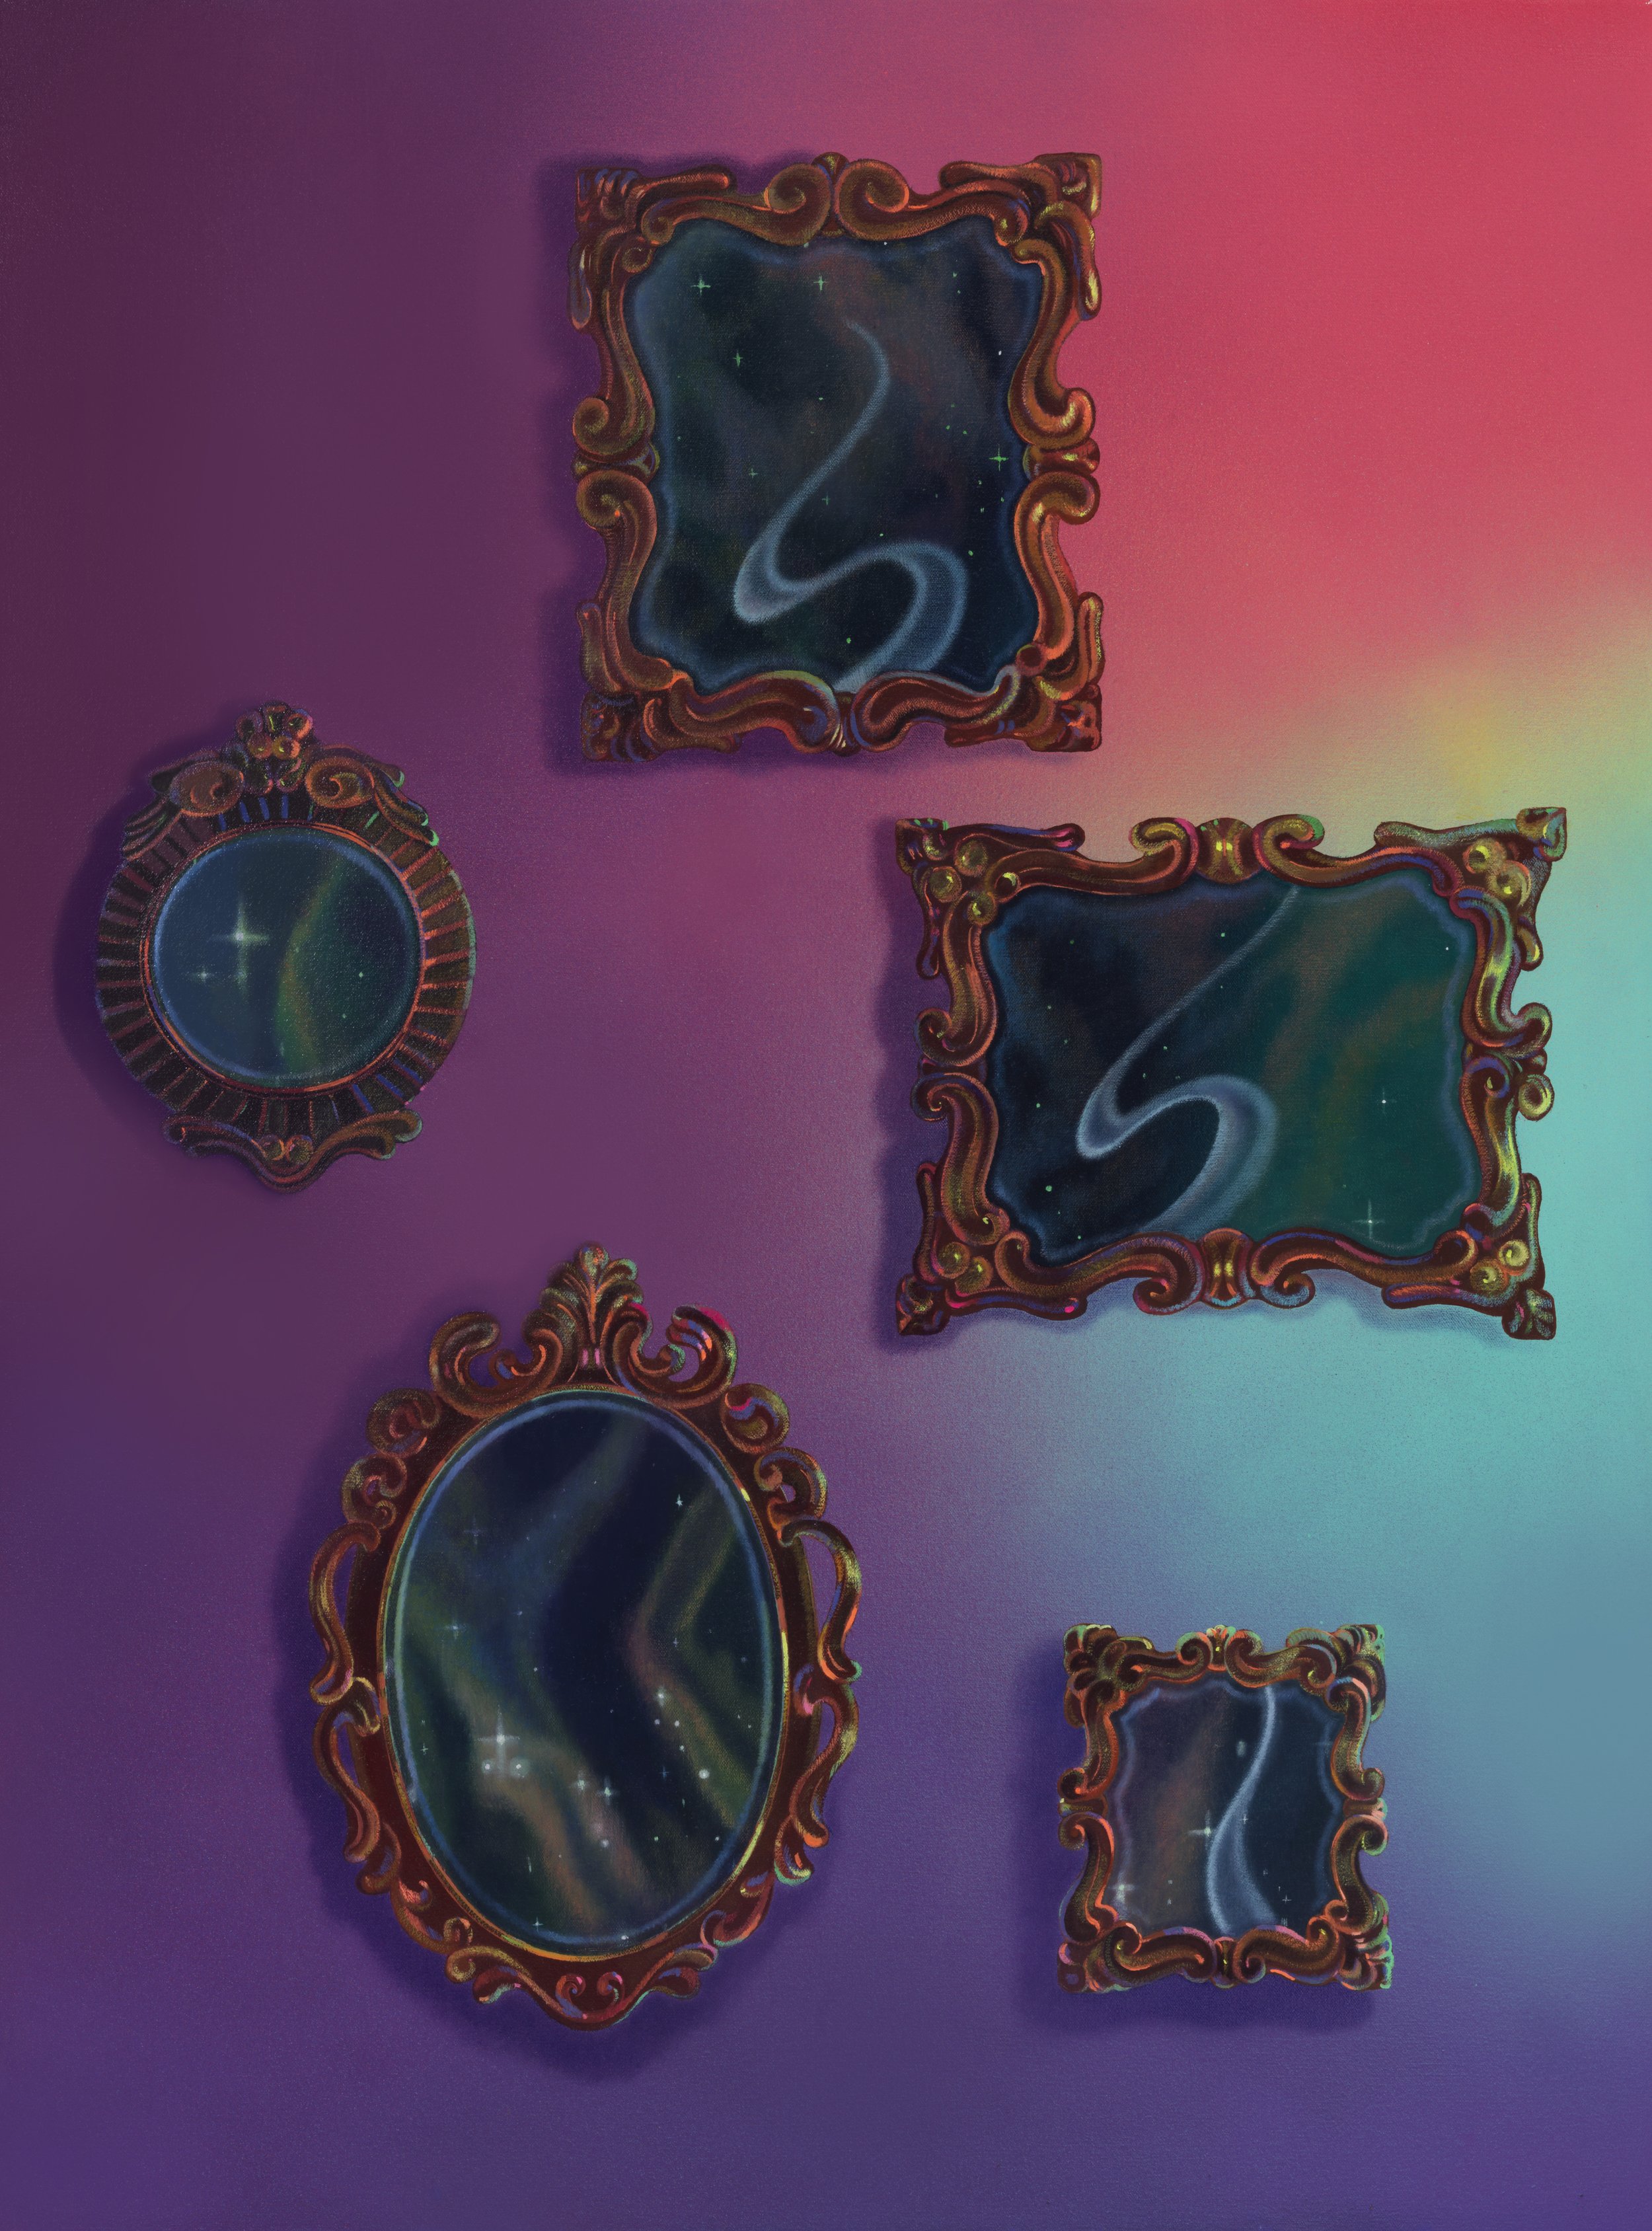 Five Mirrors, oil and acrylic on canvas, 40" x 30", 2023